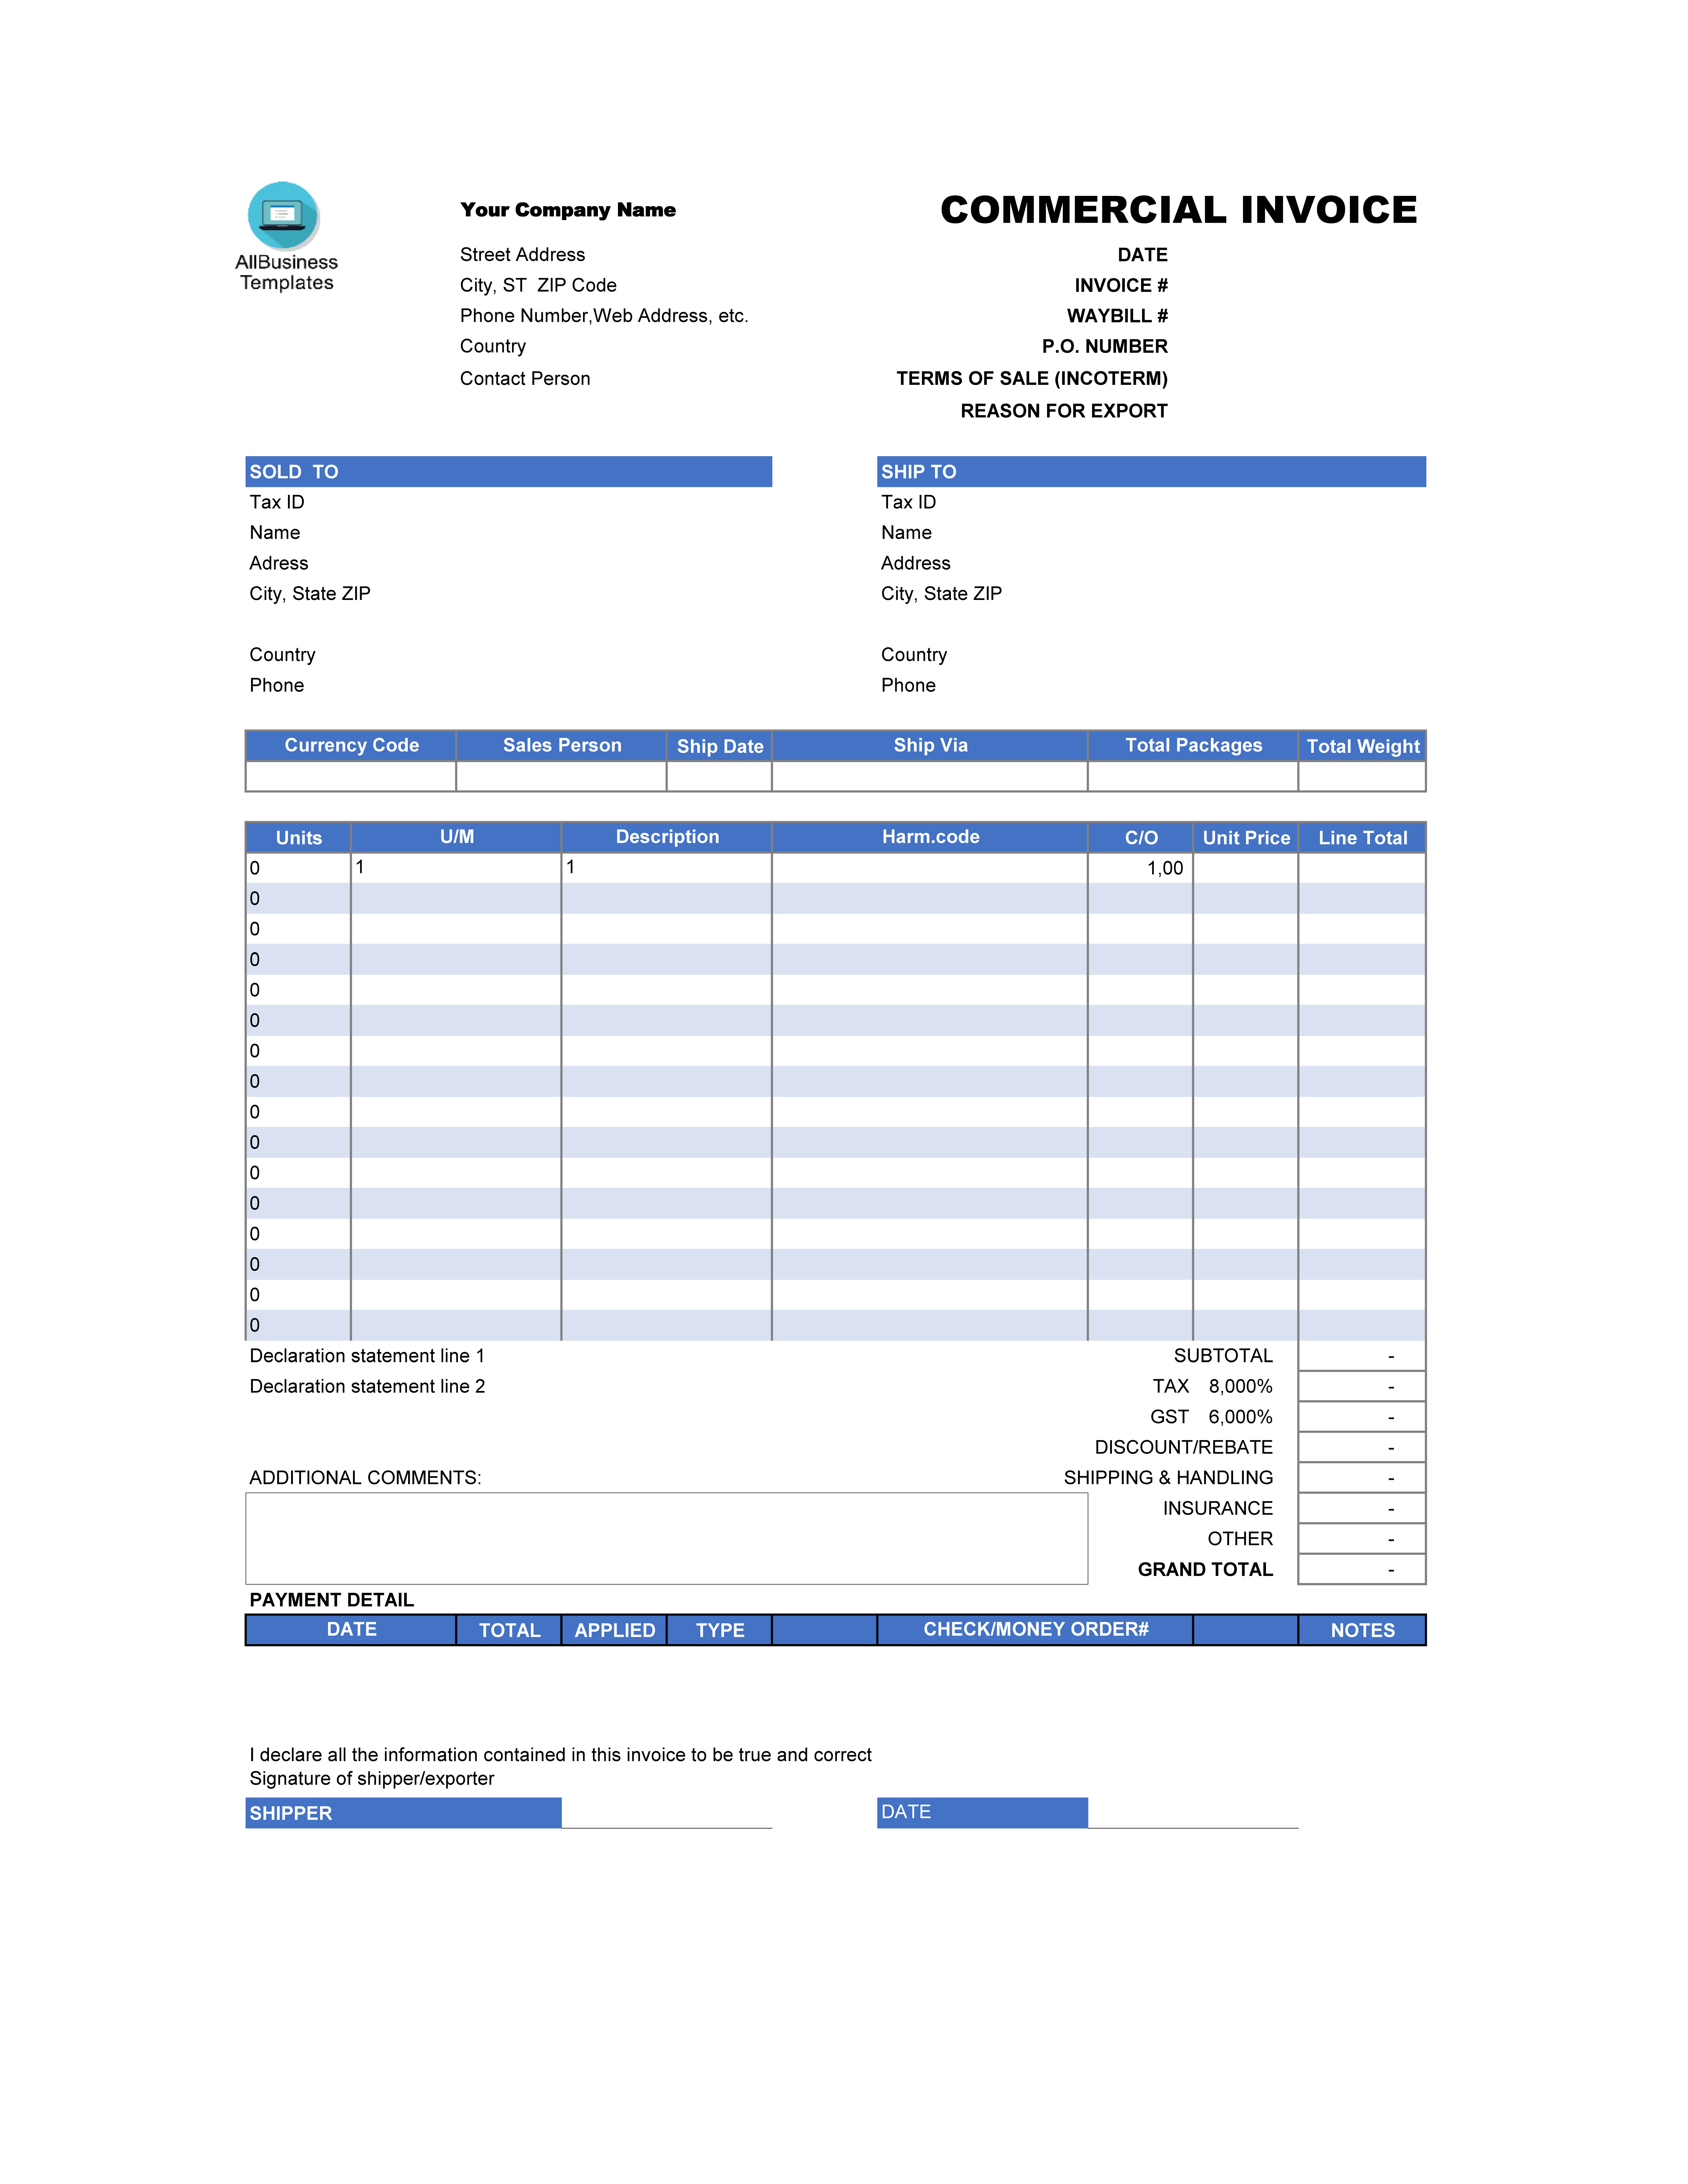 Commercial Invoice Excel main image